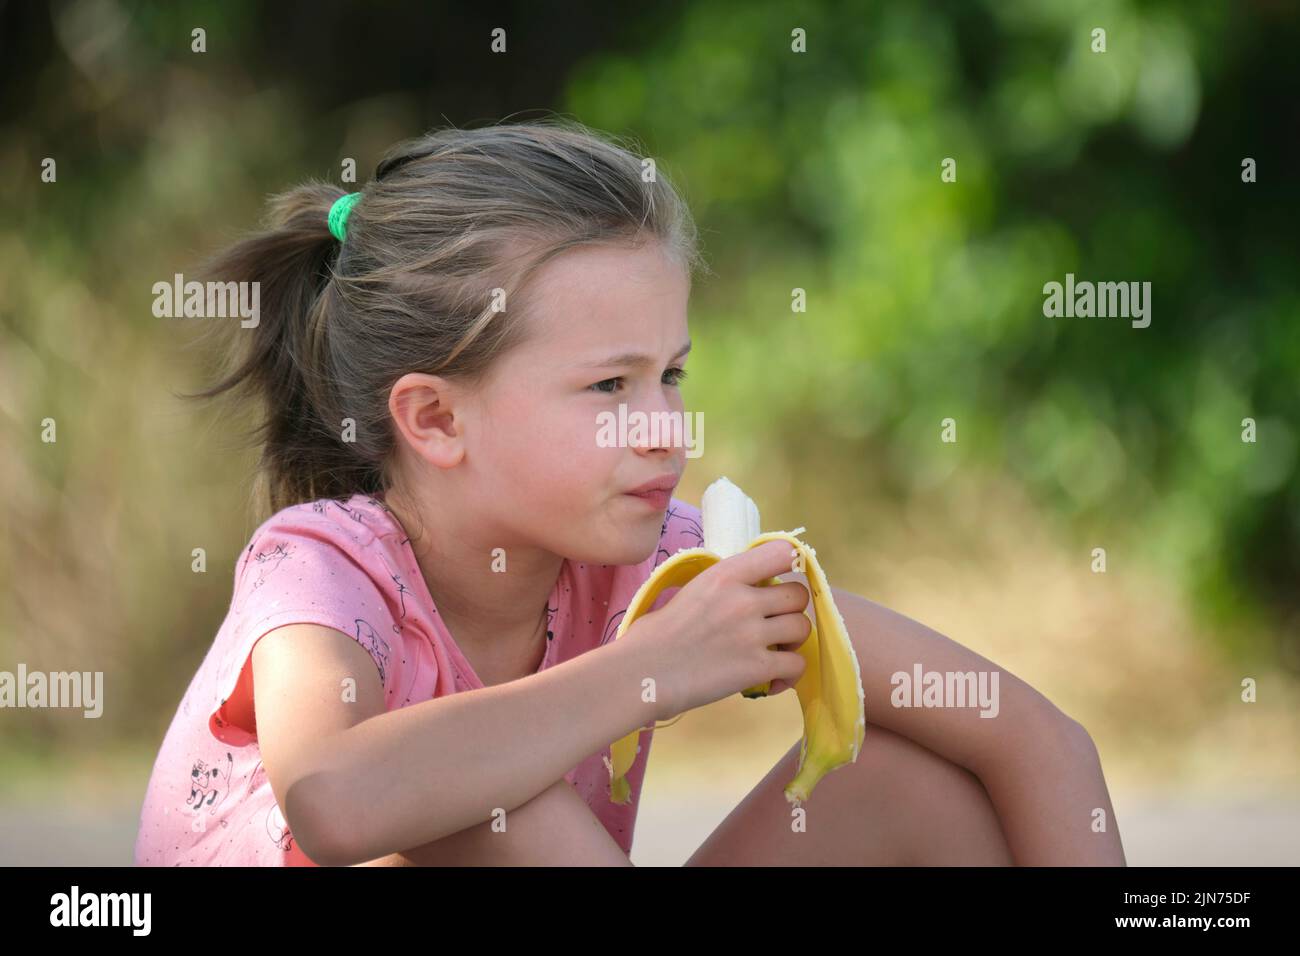 Young pretty child girl eating tasty ripe banana snacking outdoors on summer day Stock Photo